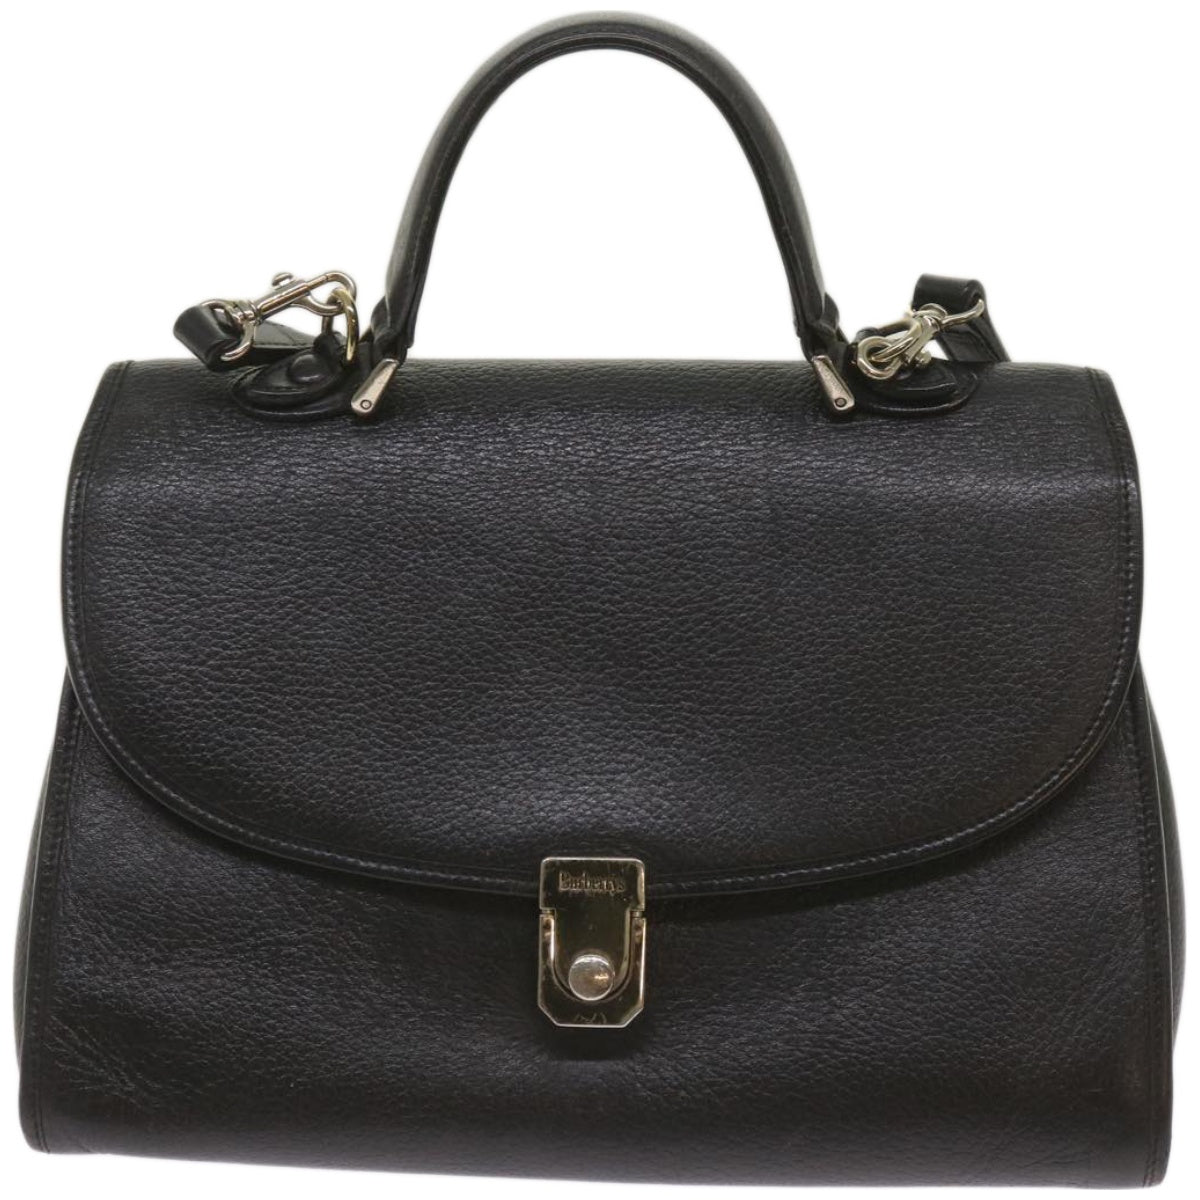 Burberrys Hand Bag Leather 2way Black Auth 68158